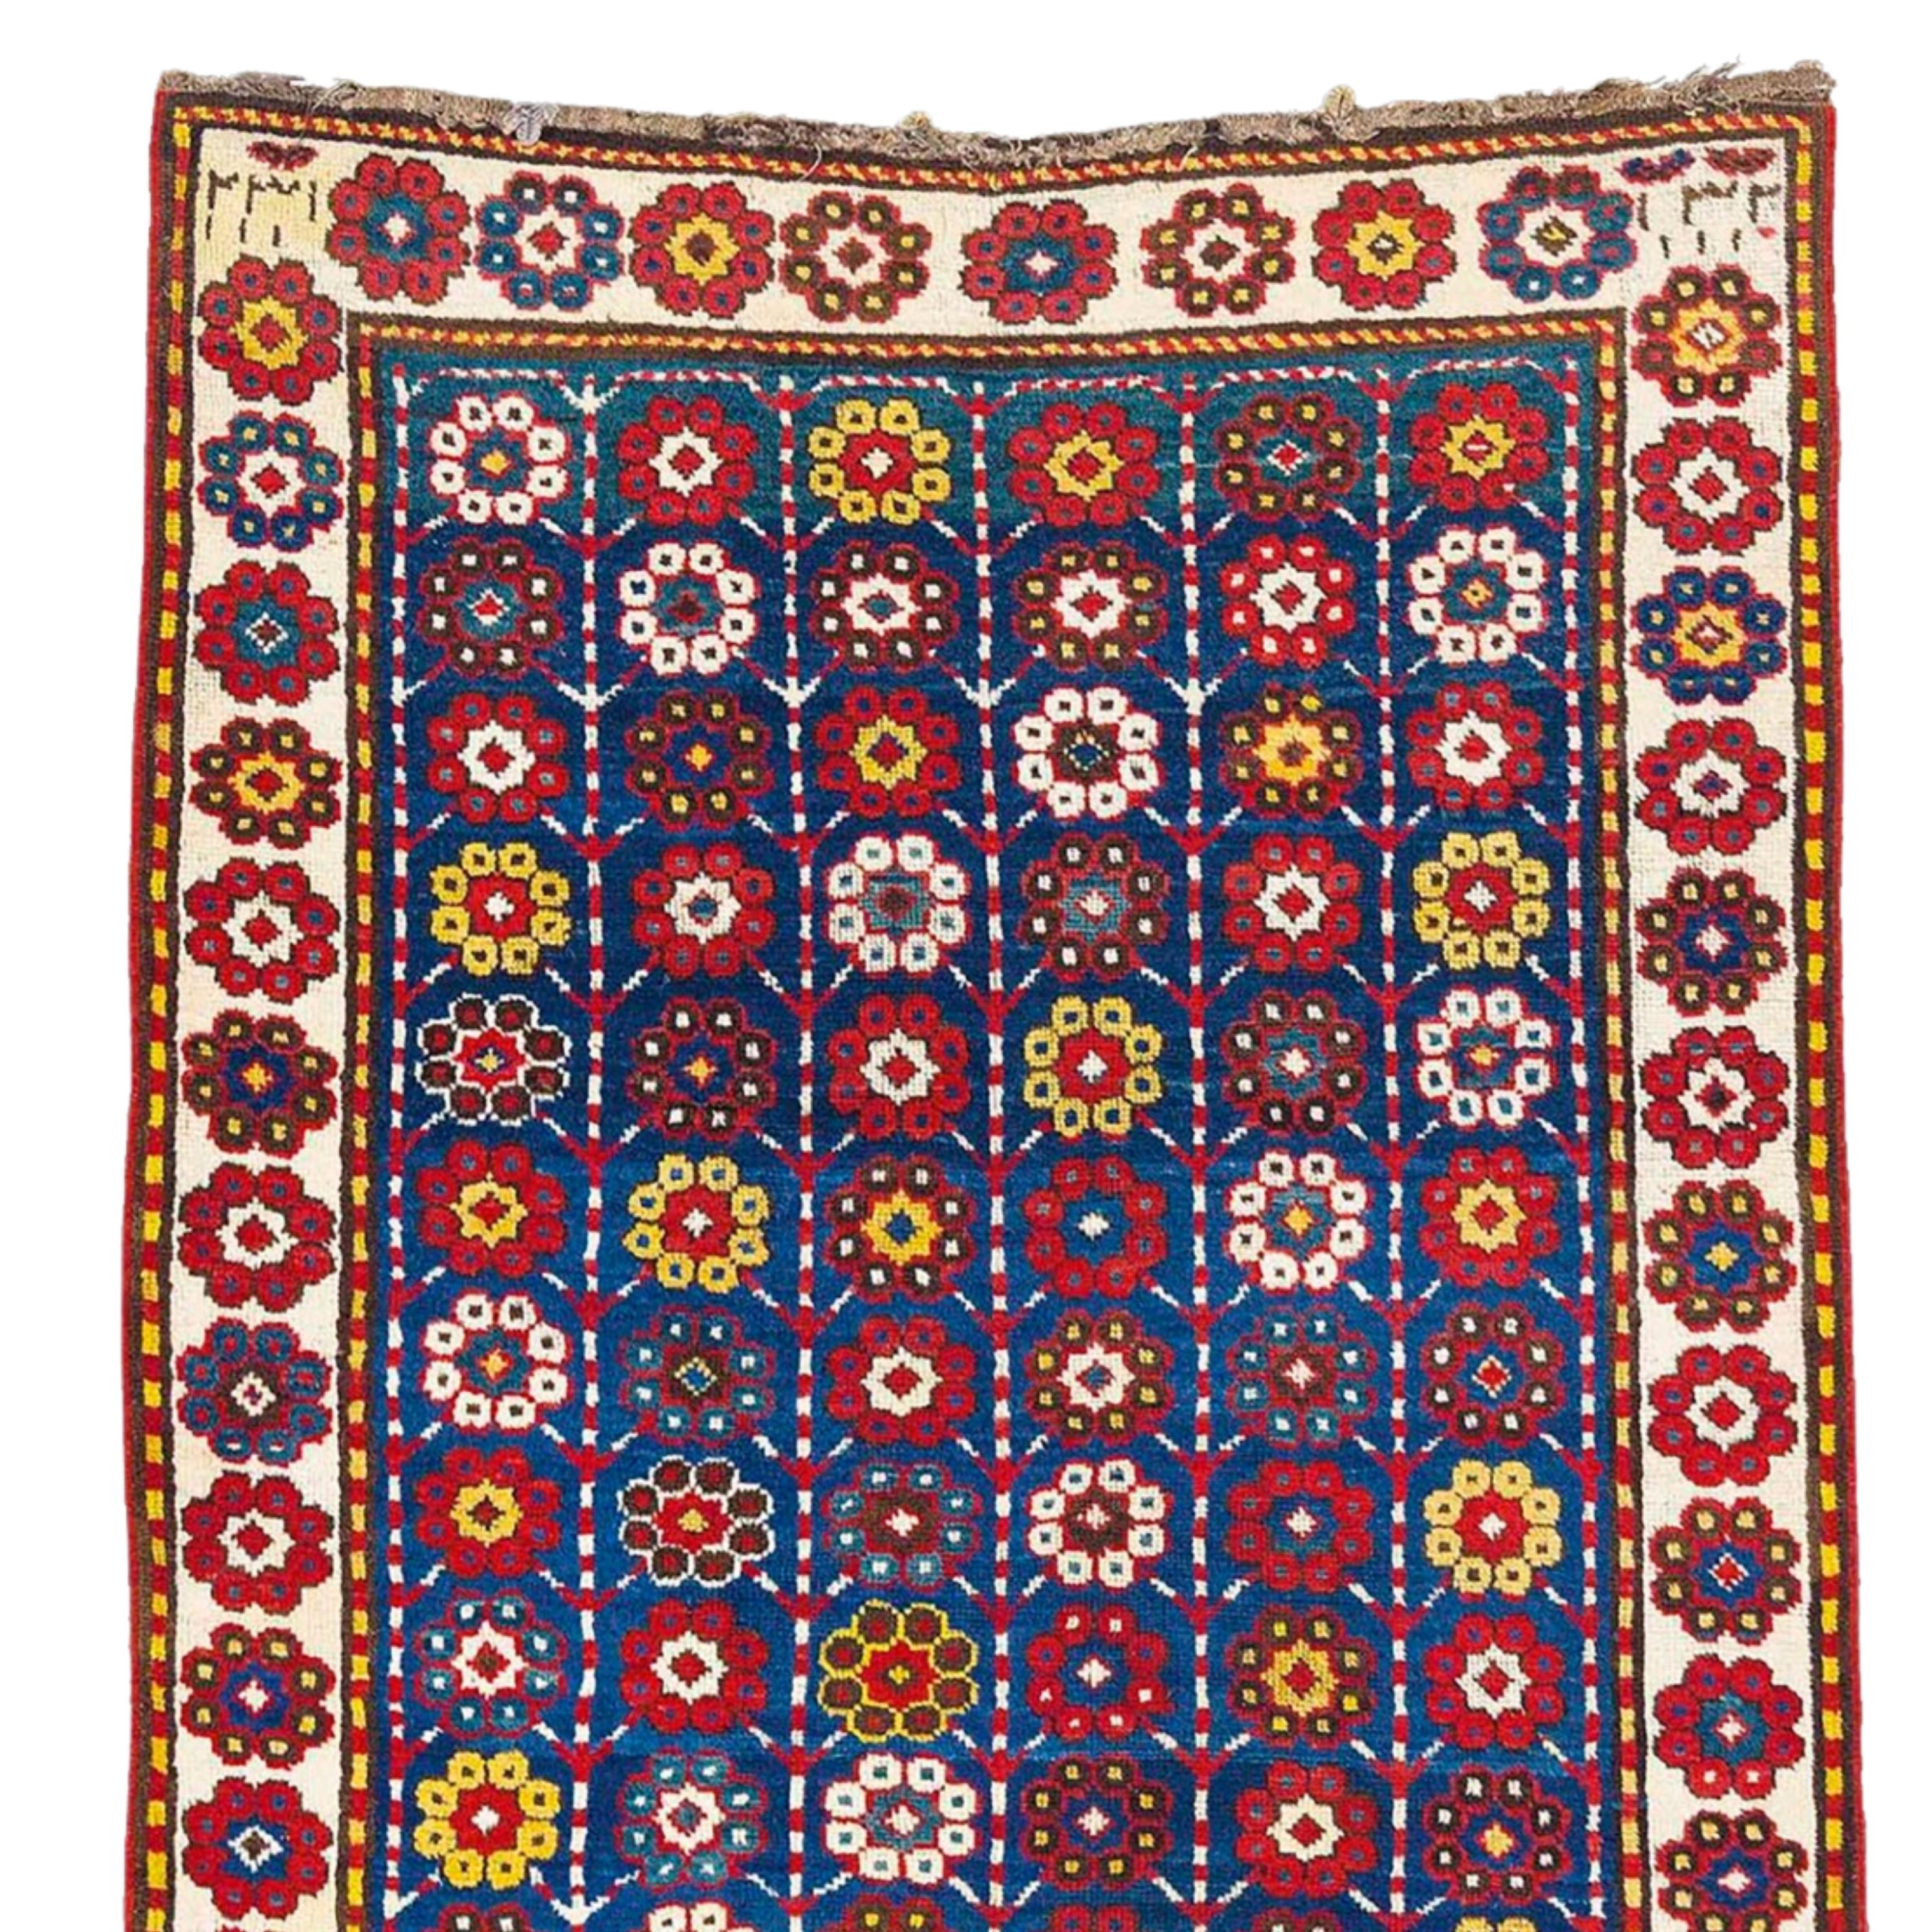 South West Caucasian Rug | Caucasus Rug
Middle of the 19th Century South West Caucasian Rug

The date on this extraordinary long carpet is not clearly legible. Its independent design and the good colours,unusual blue ground with this design however,